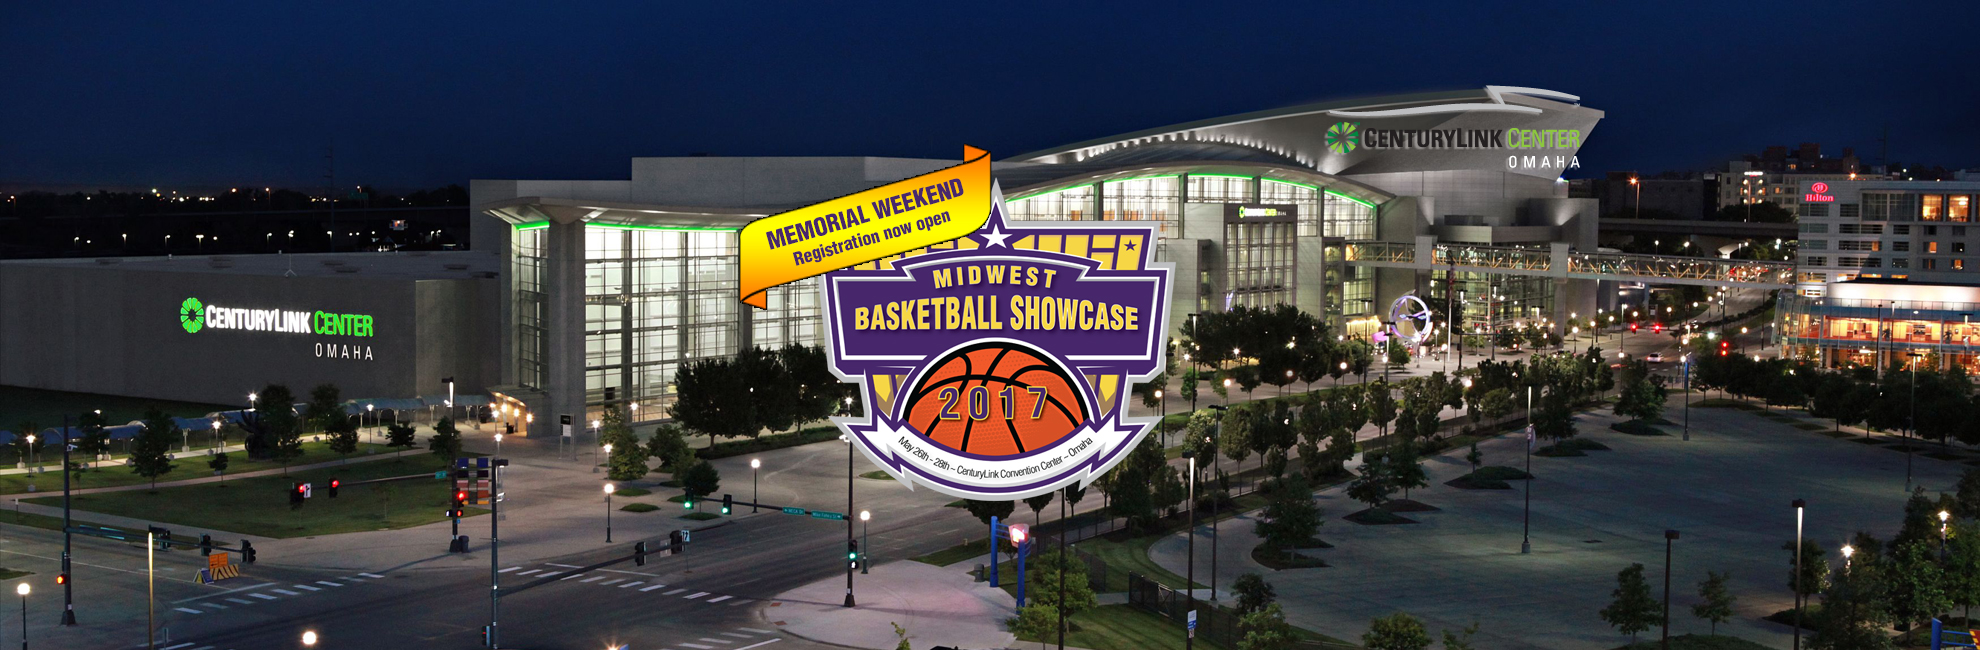 Midwest Basketball Showcase May 2426, 2019 Midwest Basketball Showcase